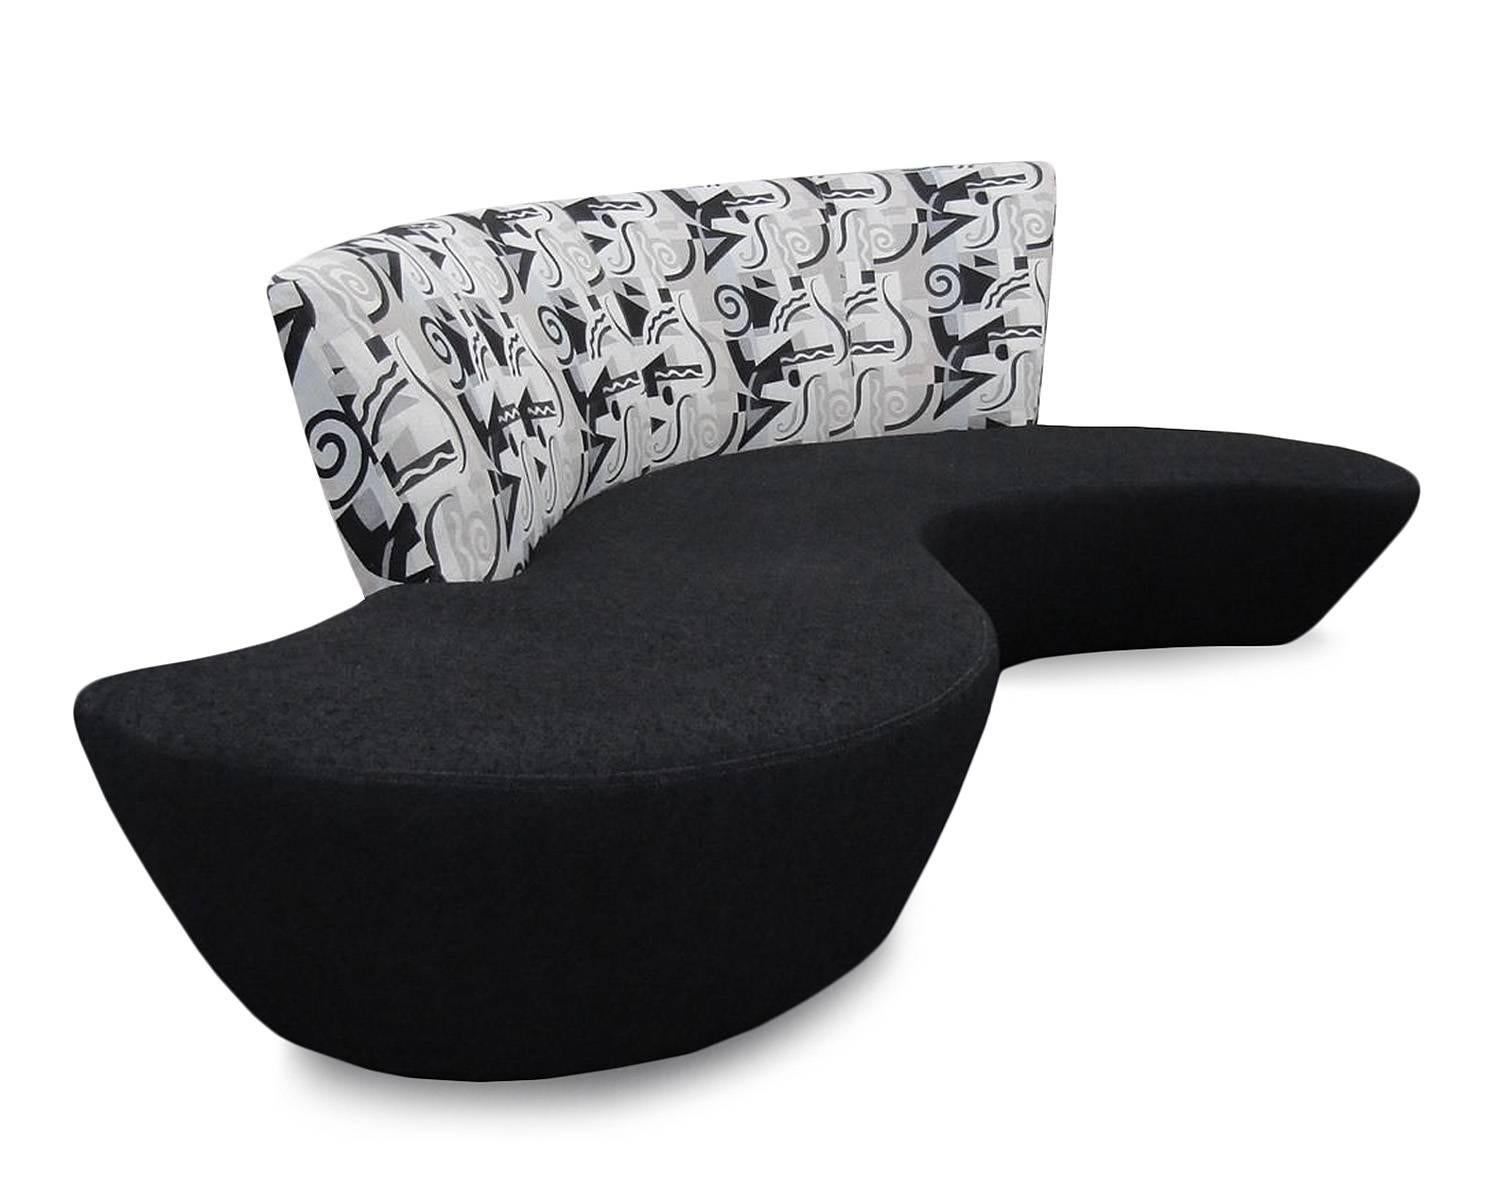 A sculptural modern sofa designed by Vladimir Kagan and inspired by the curves of the Guggenheim Museum in Bilbao Spain, circa late 1990s-early 2000s.

Measures: 95 W x 45 D x 39 H inches
  